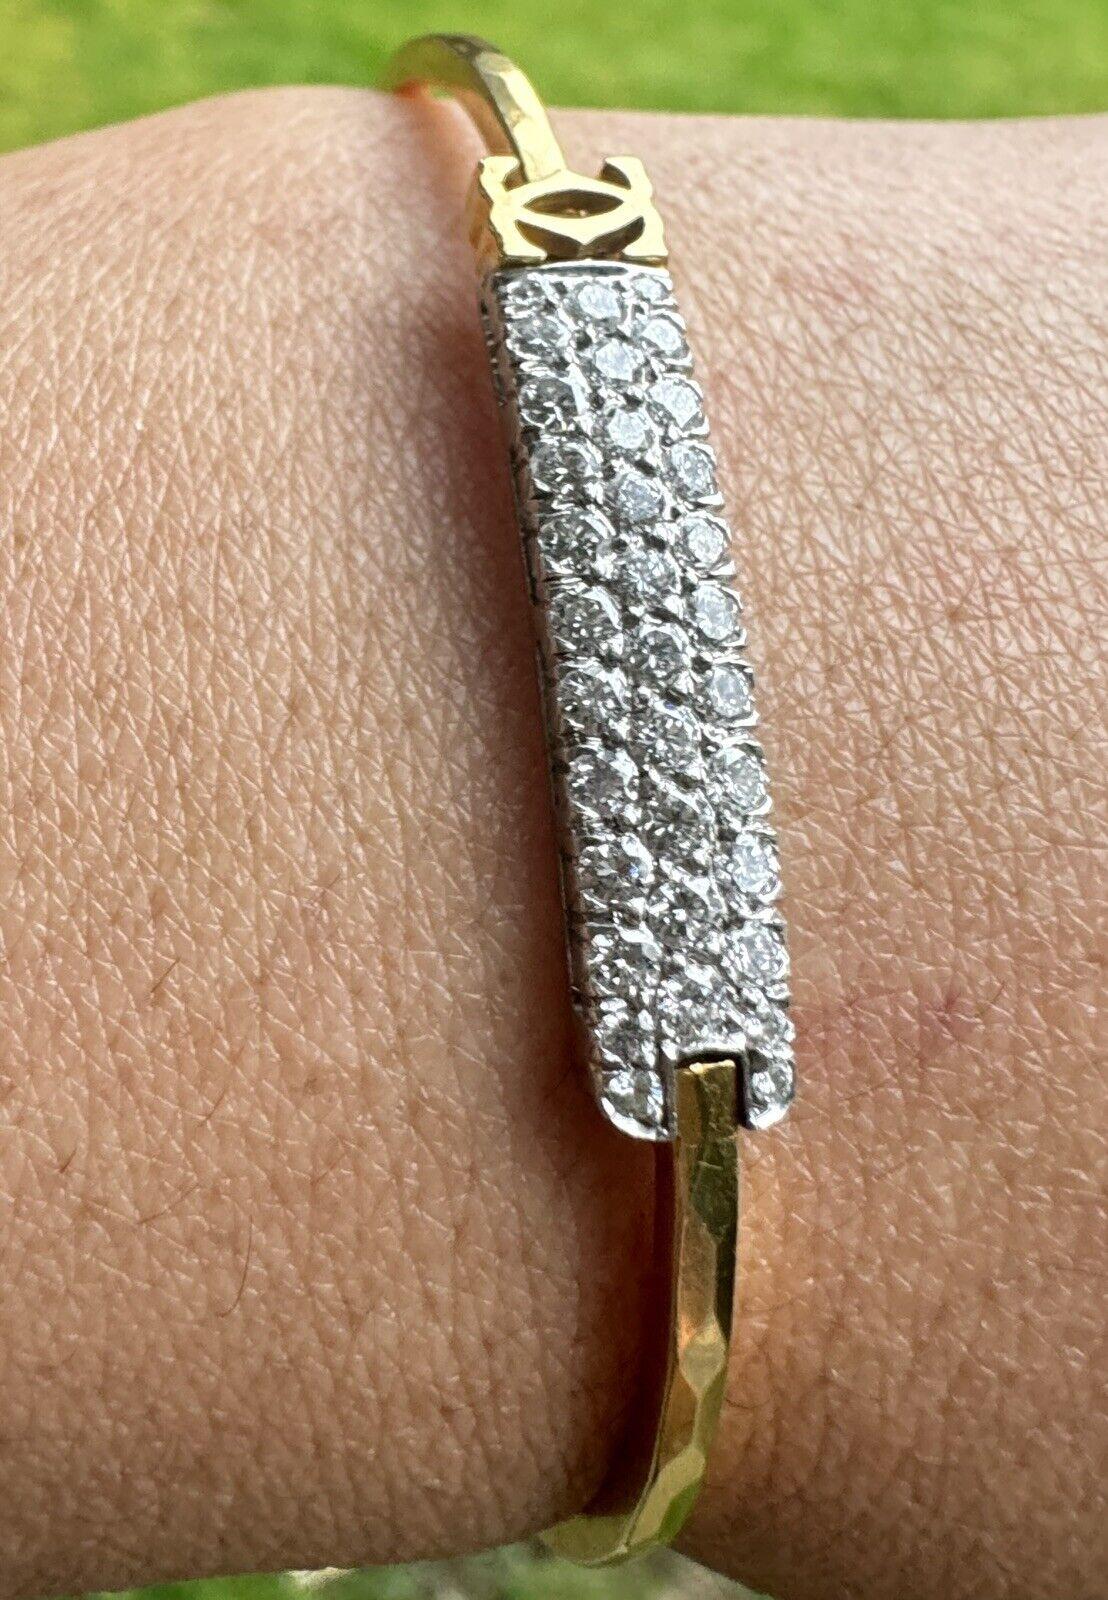 Cartier 1970s Vintage 18k Yellow Gold, Platinum, & Diamond Bangle Bracelet


Here is your chance to purchase a beautiful and highly collectible designer bangle bracelet.  Truly a great piece at a great price! 

Details:
Size : Up to 7.4